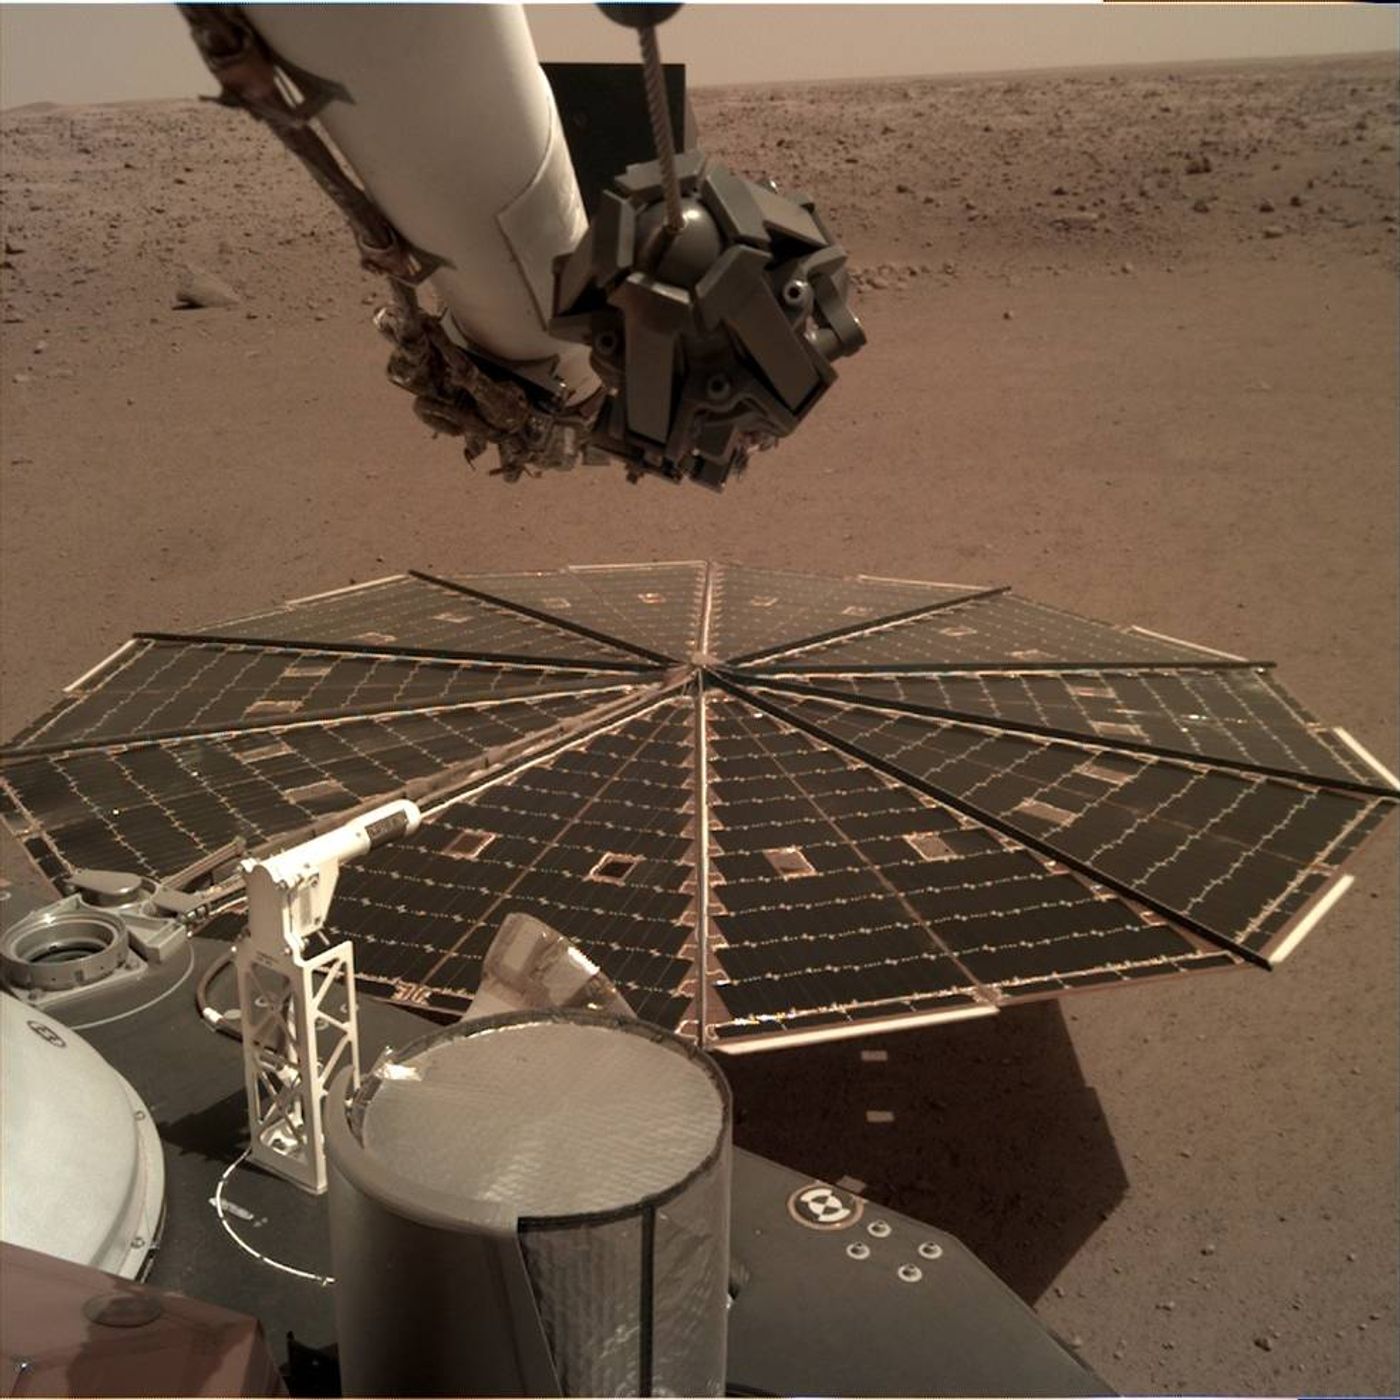 A view of Mars from InSight's perspective.